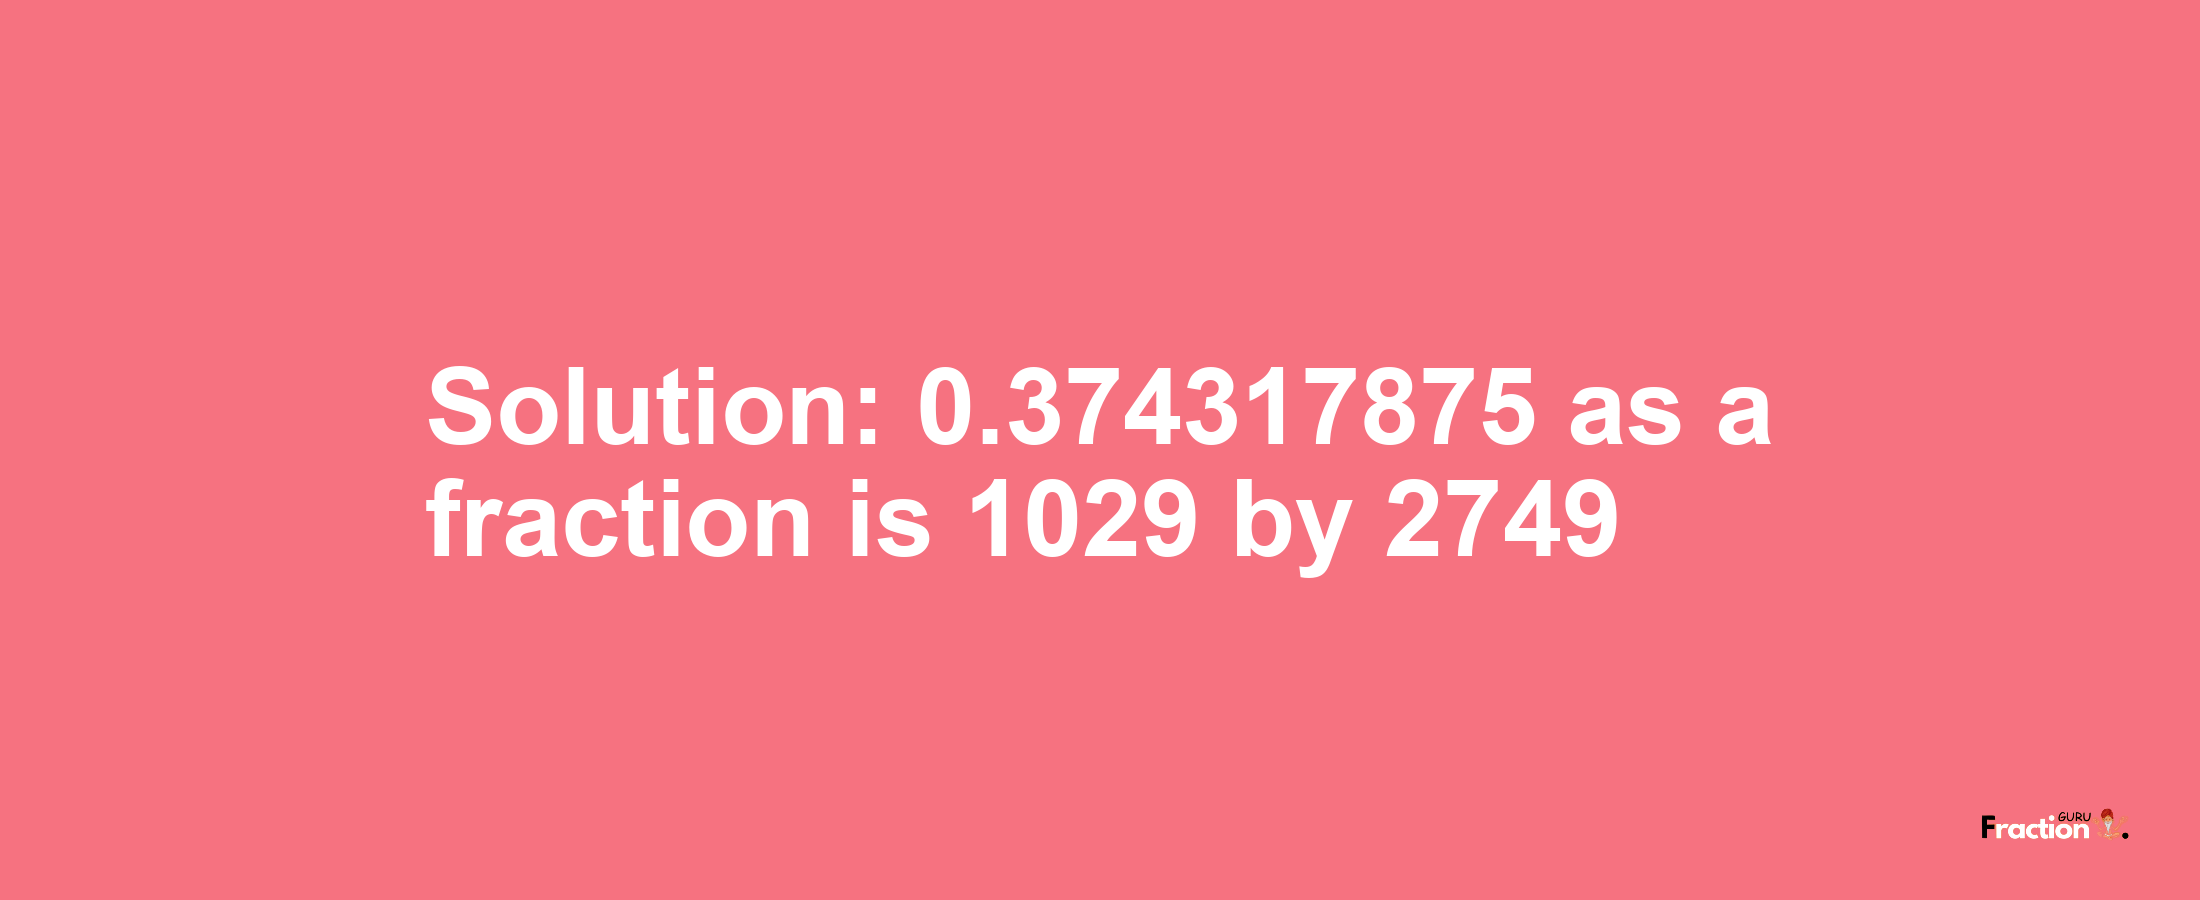 Solution:0.374317875 as a fraction is 1029/2749